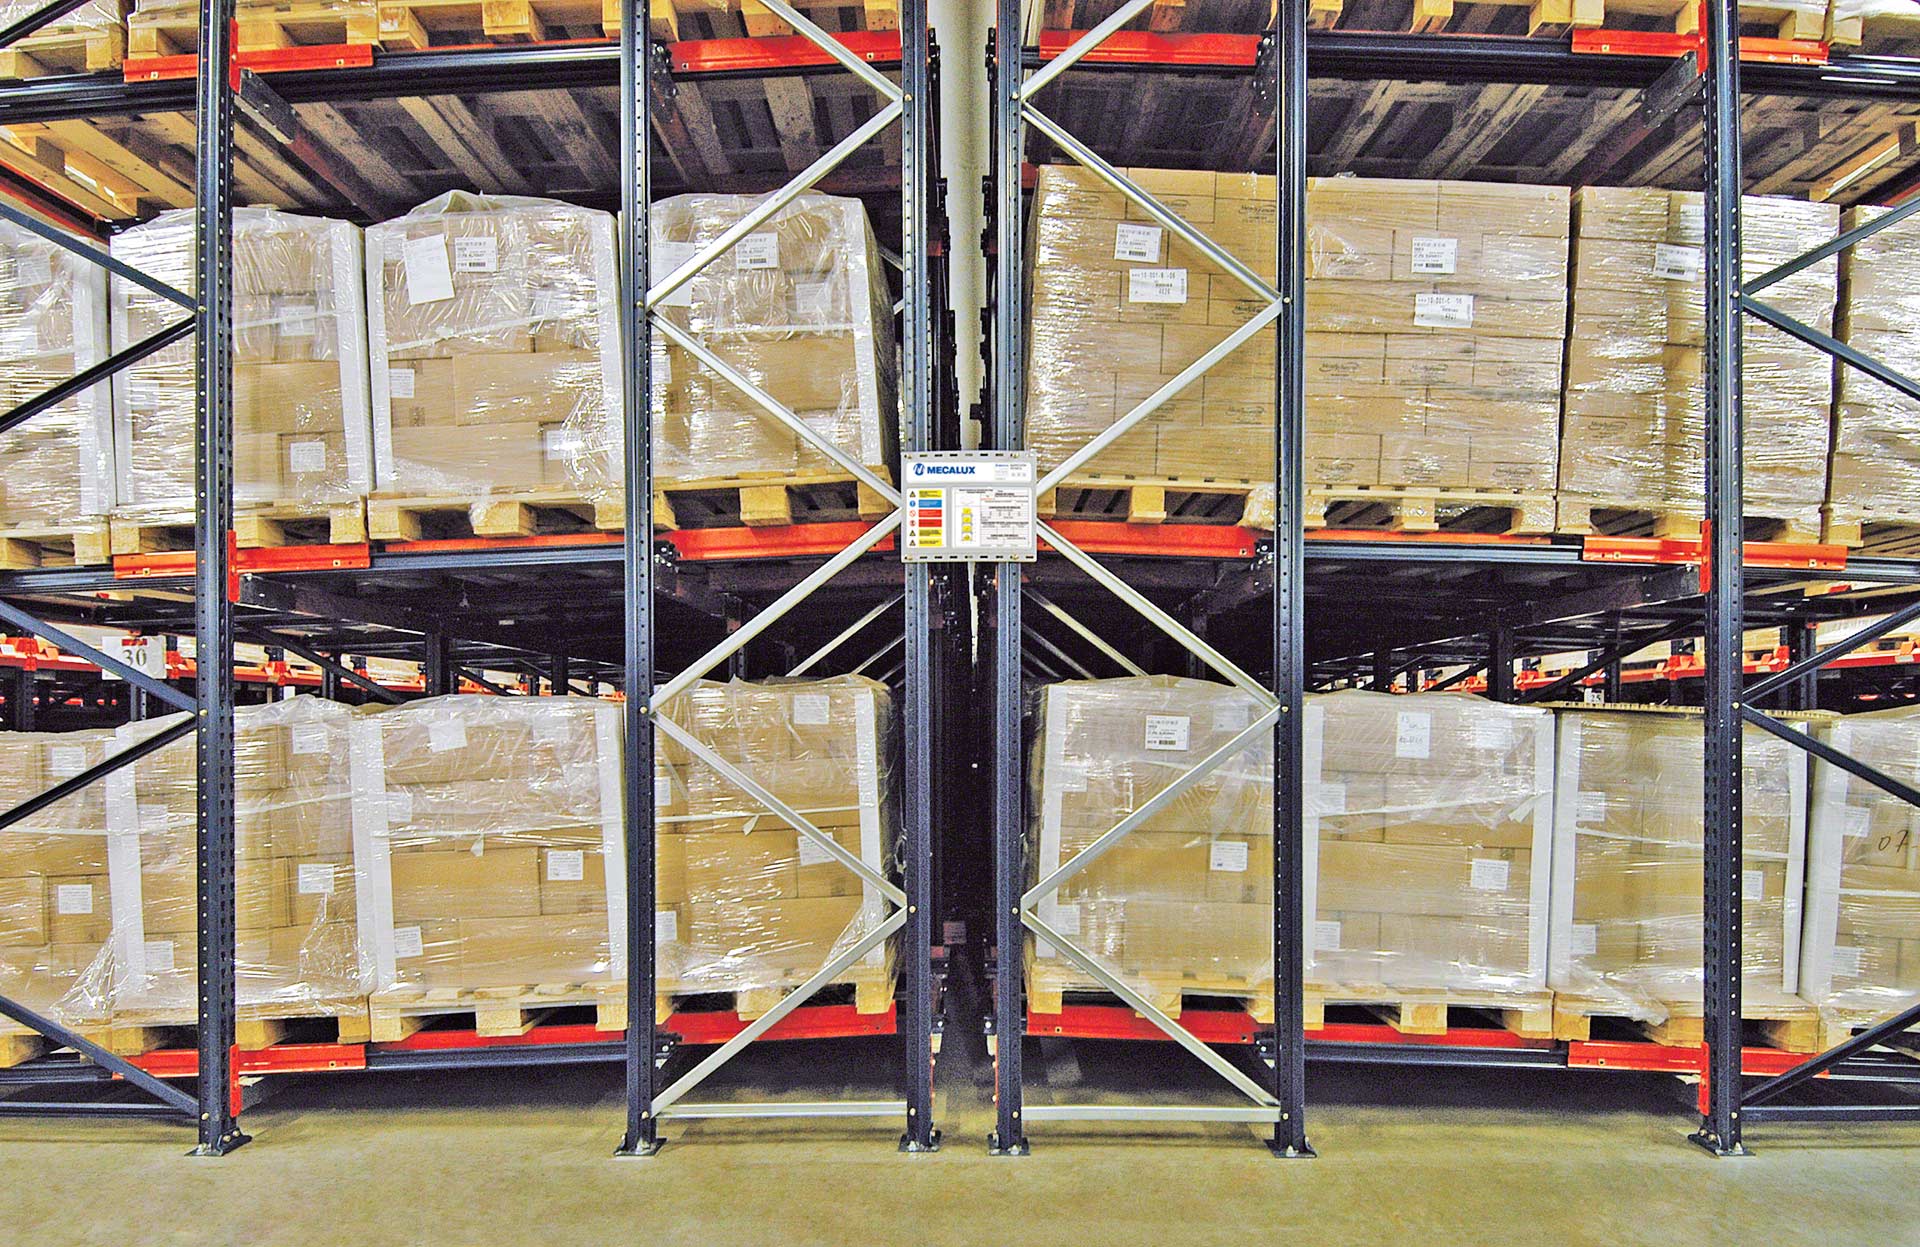 Push-back racking with carts can store up to 4 pallets deep per channel